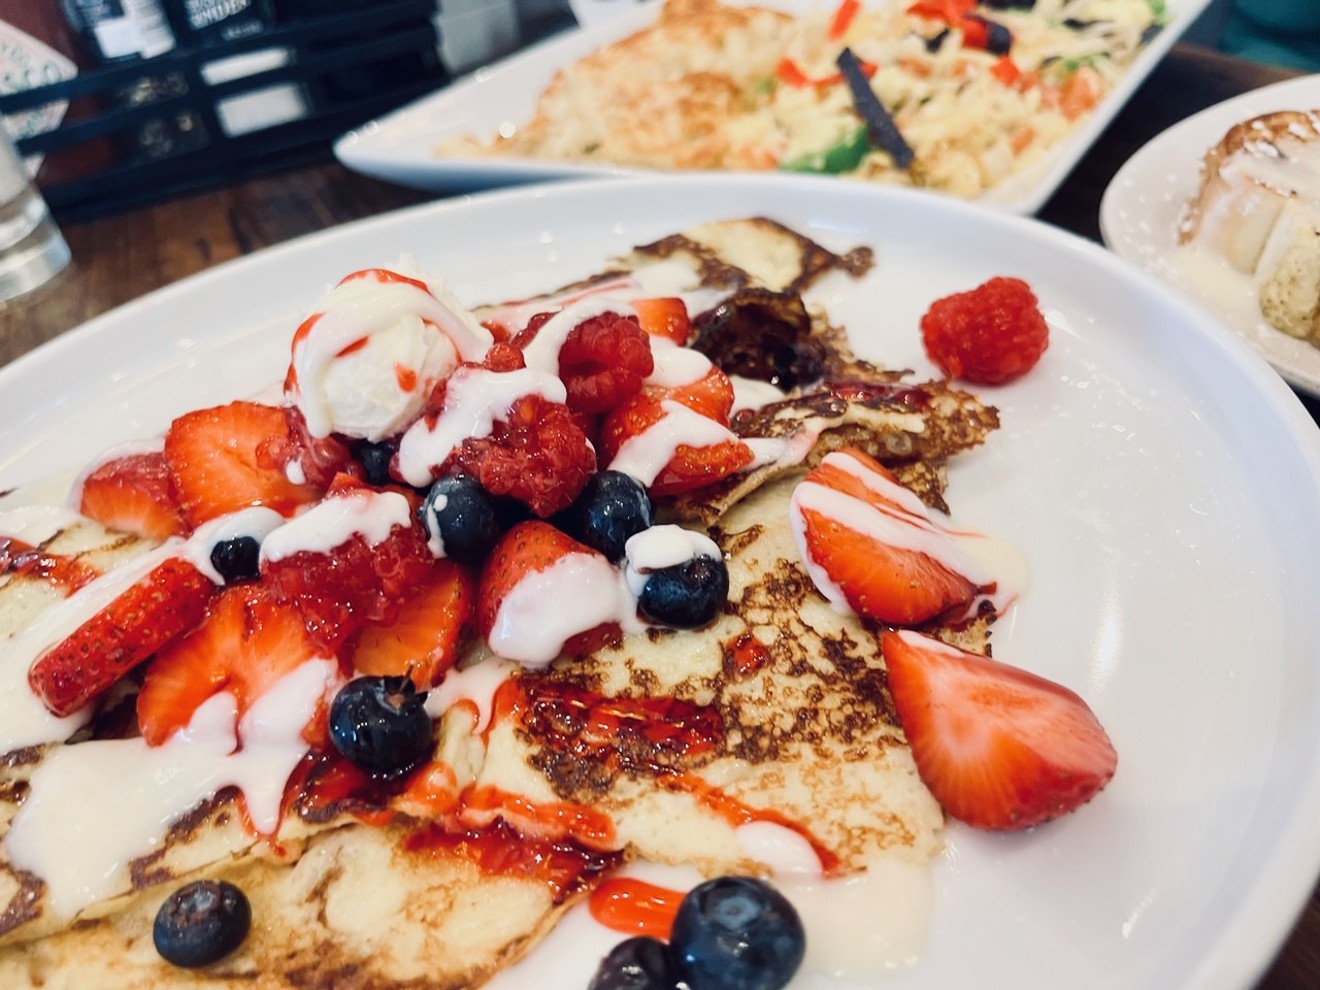 B&B crepes are topped with berries and mascarpone, cream cheese and a raspberry glaze.